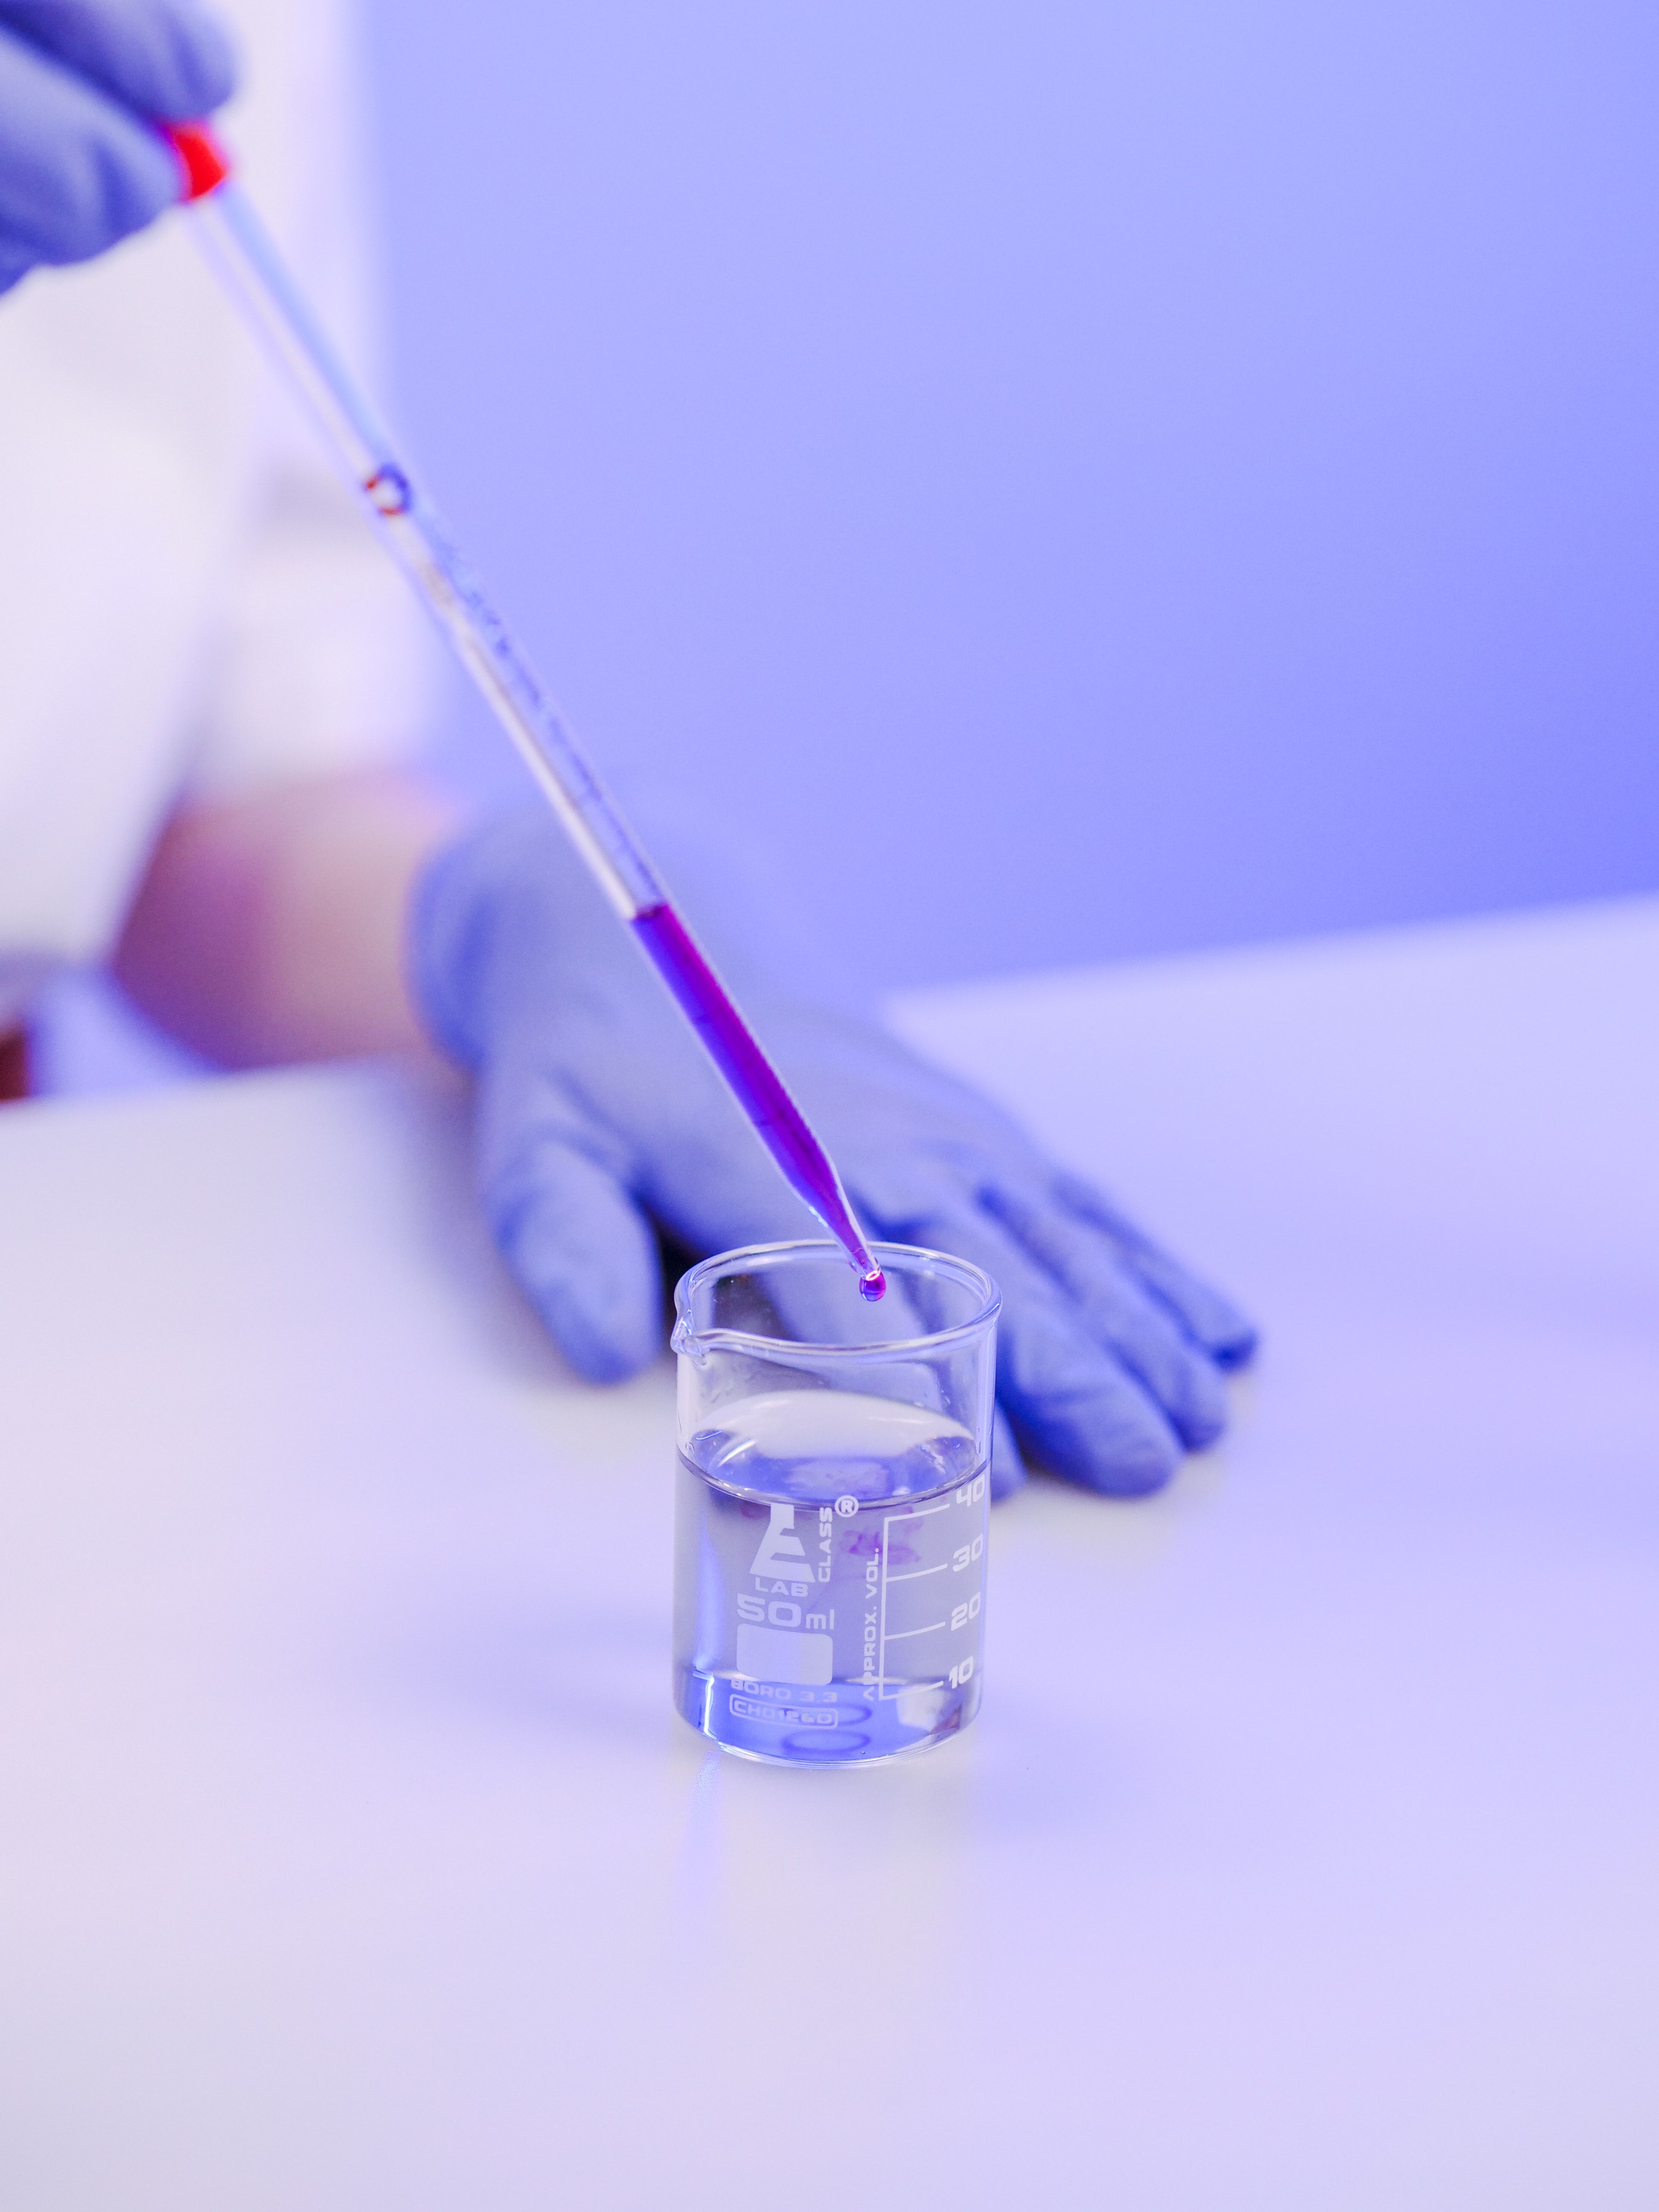 A person wearing blue gloves and holding a dropper with purple liquid. - Chemistry